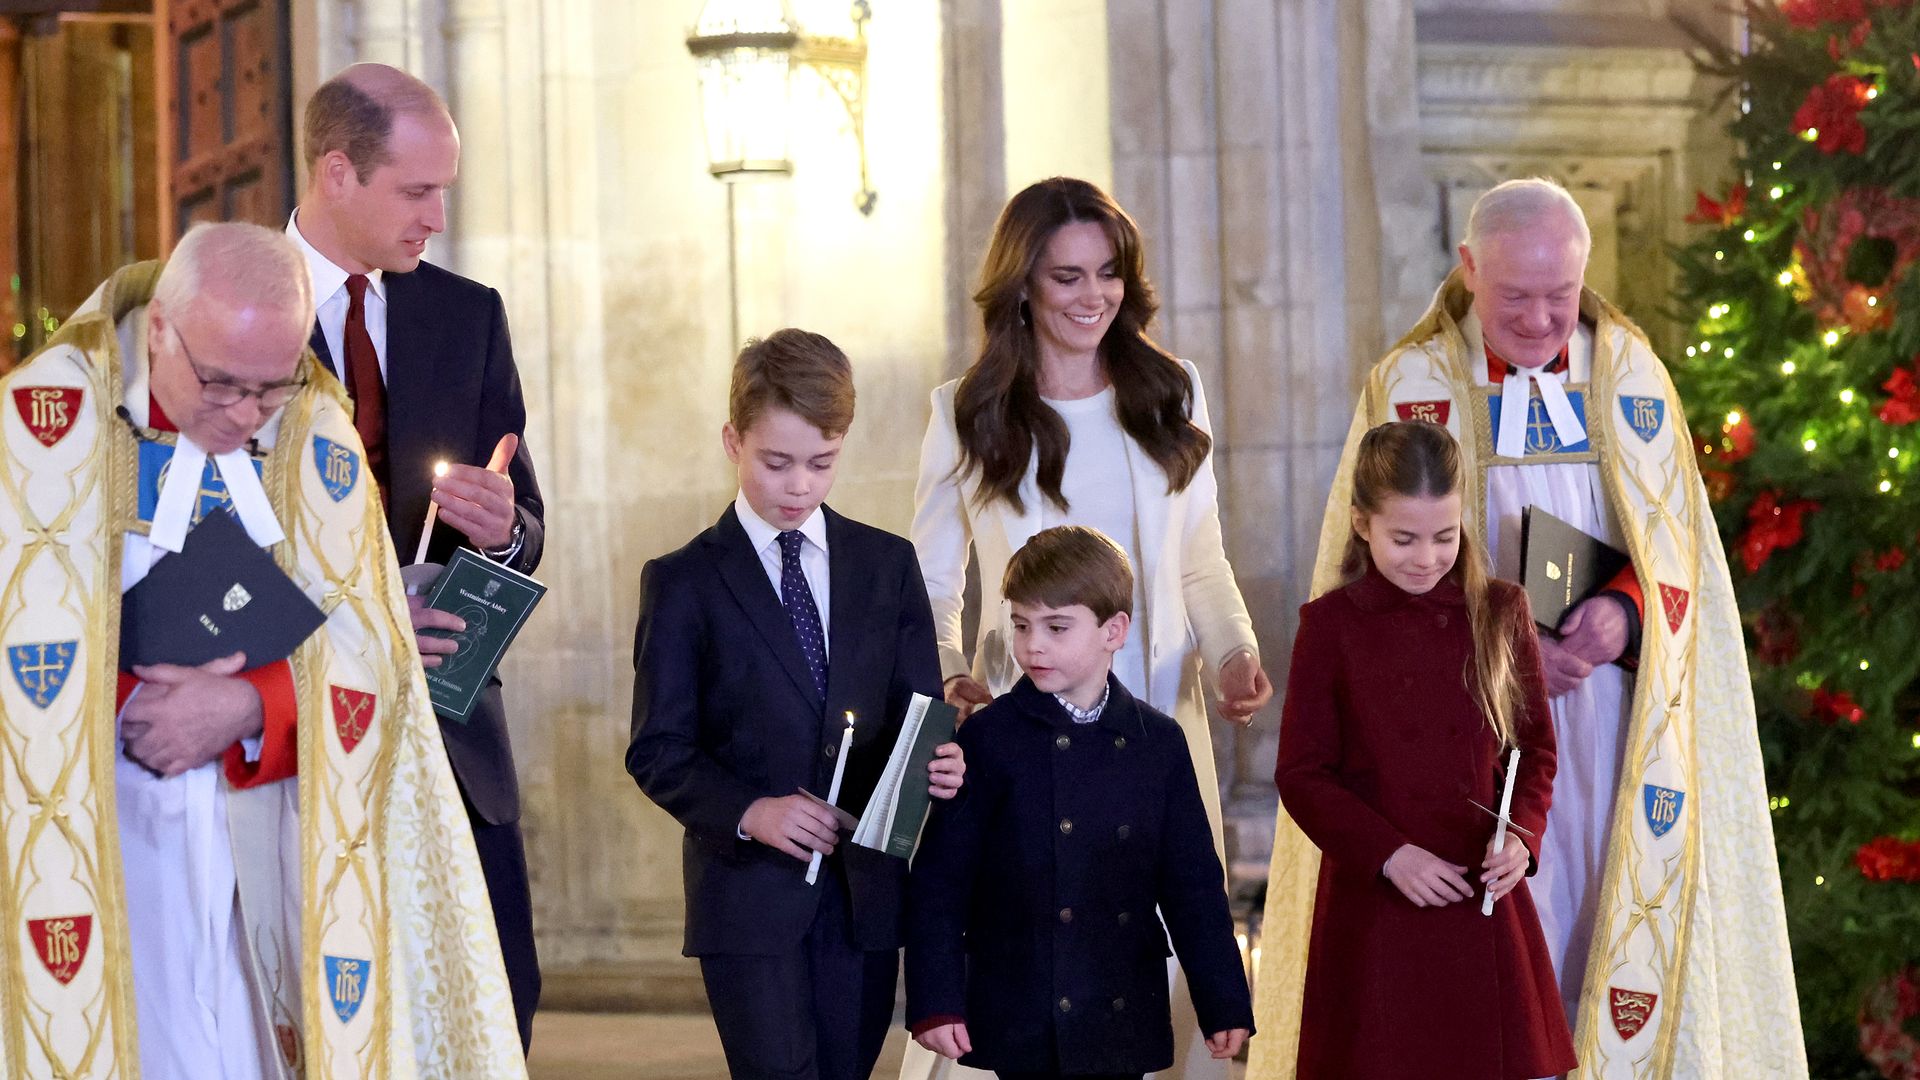 Catherine, Princess of Wales, Prince Louis of Wales, Princess Charlotte of Wales, Prince William, Prince of Wales and Prince George of Wales process out of The "Together At Christmas" Carol Service at Westminster Abbey